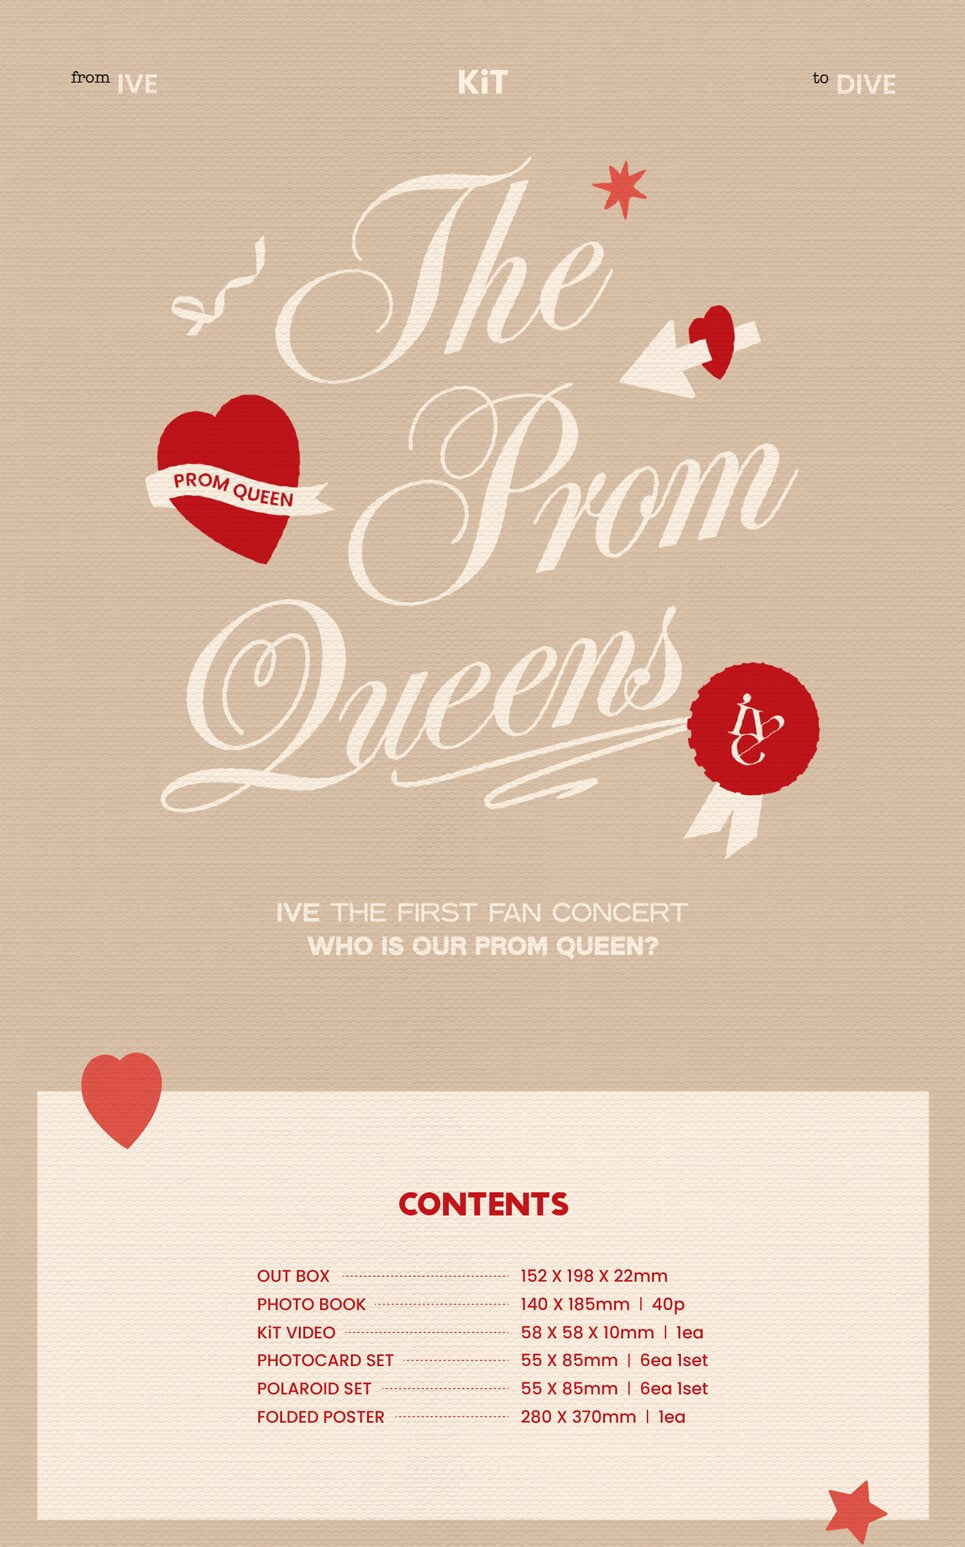 IVE THE FIRST FAN CONCERT The Prom Queens KiT Inclusions Product Info